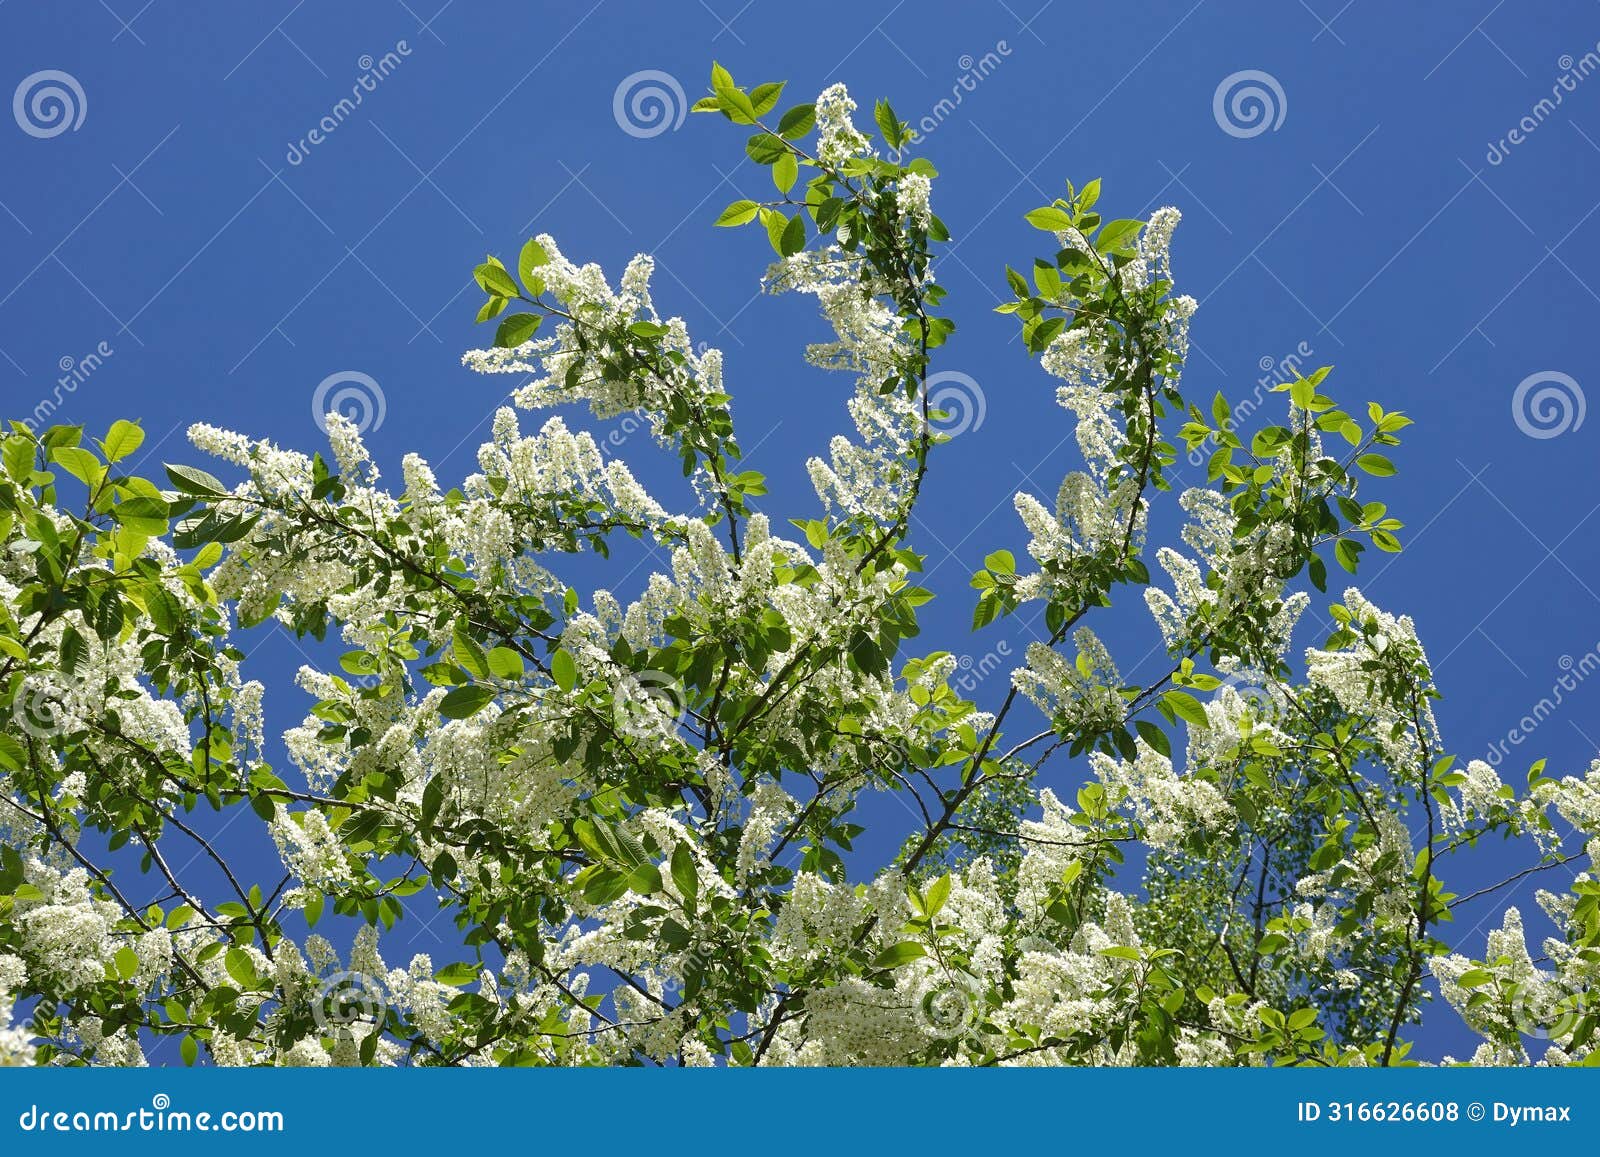 bird cherry branches with lot of blooming white flowers against clear cloudless sky in spring day